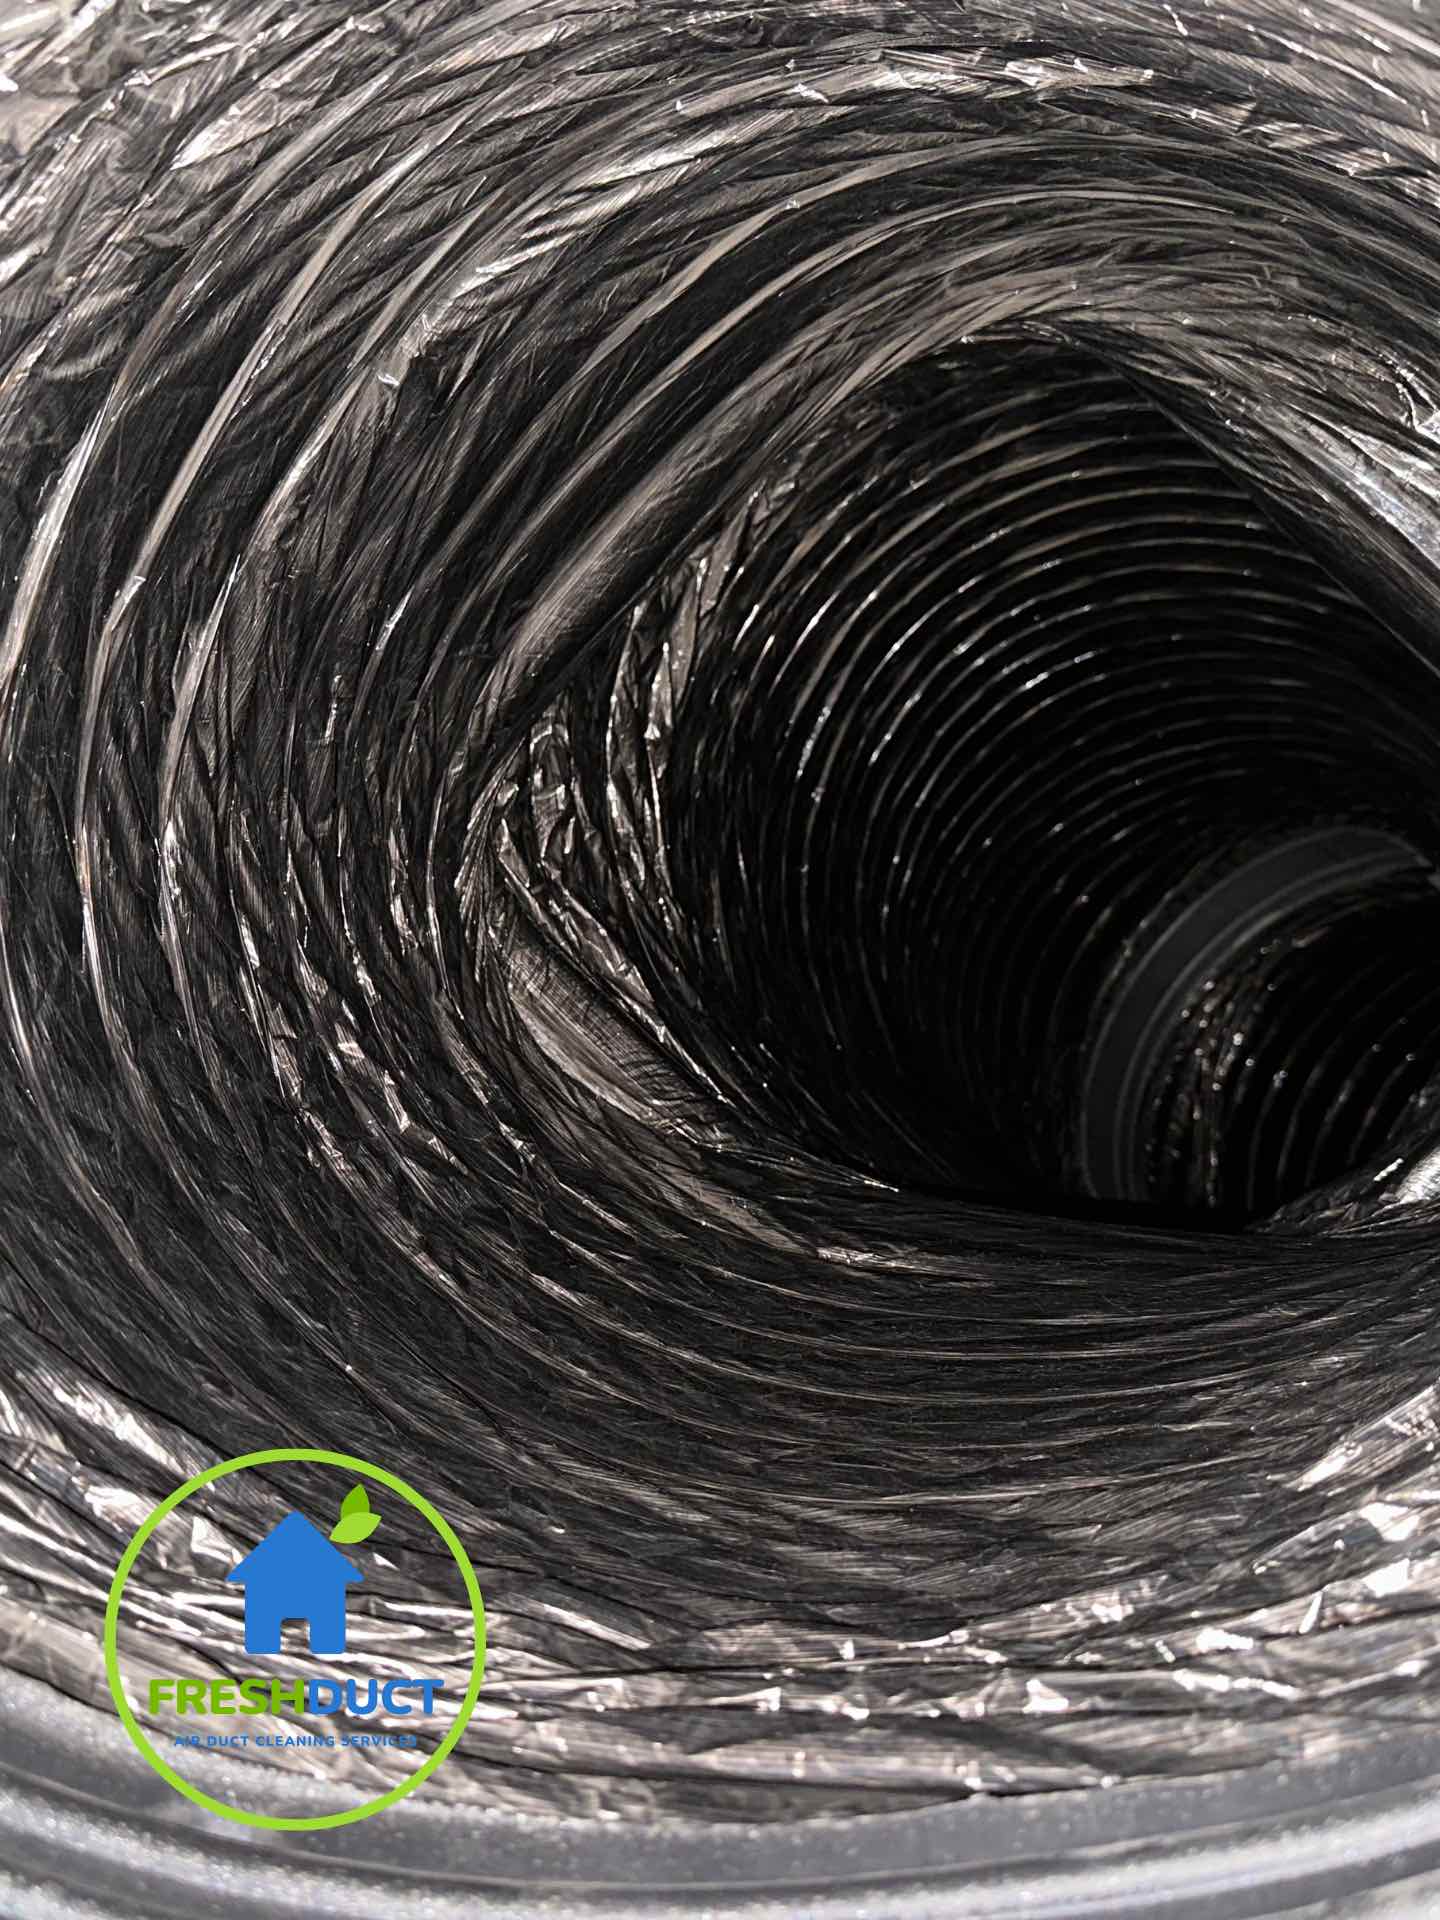 Melbourne Air Duct Cleaning Melbourne - FreshDuct Air Duct cleaning Experts For Heating & Cooling